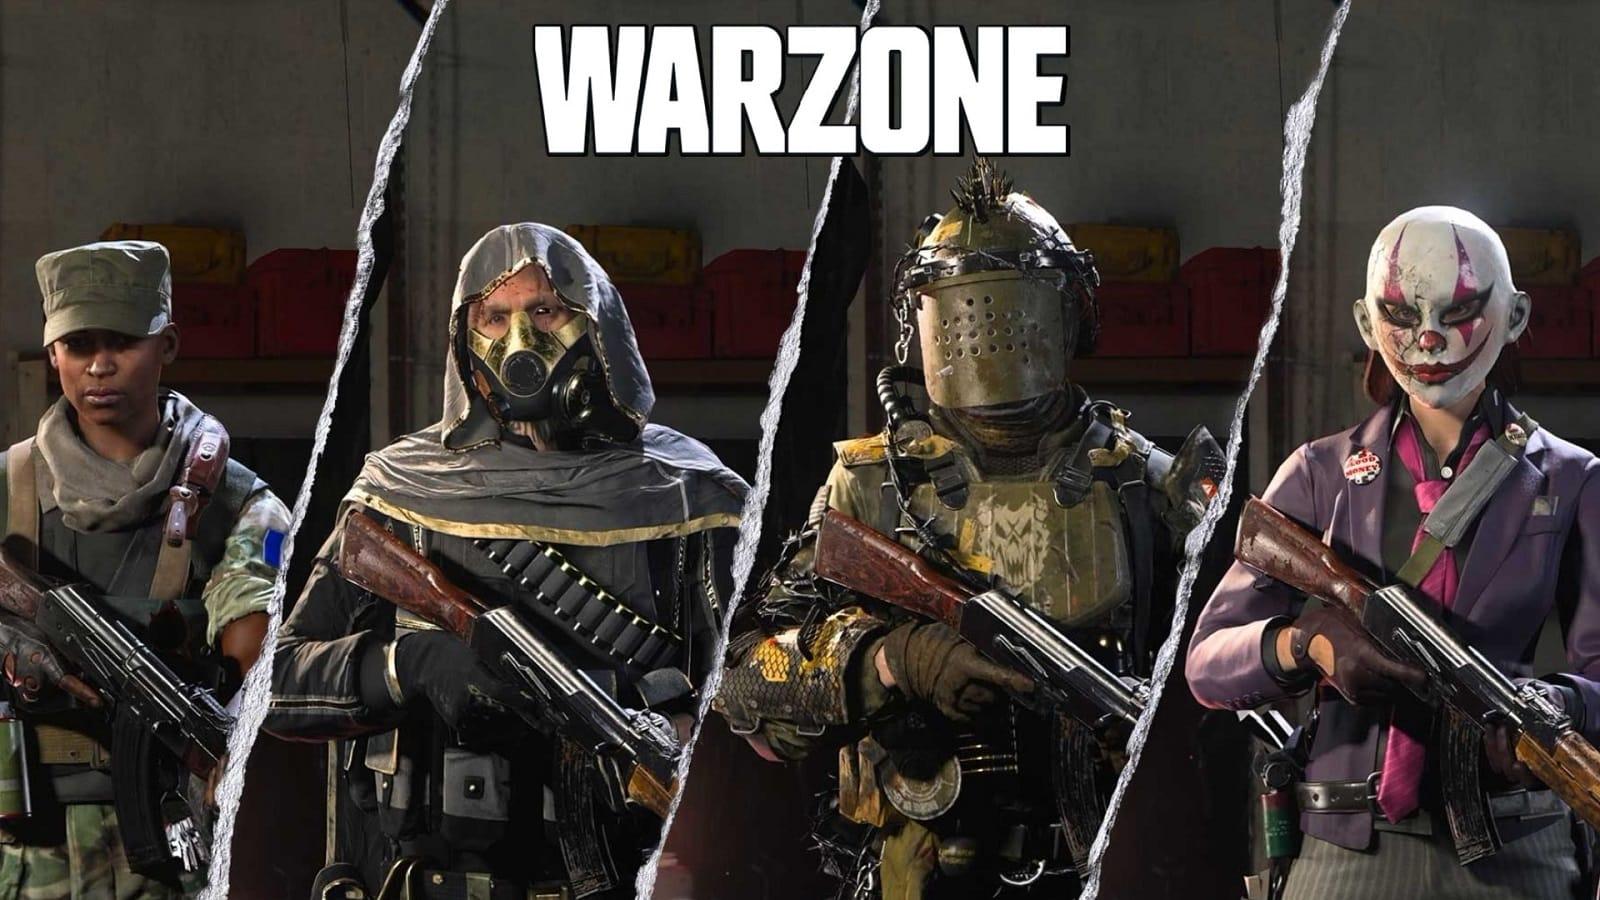 Is Warzone free-to-play on PS5?